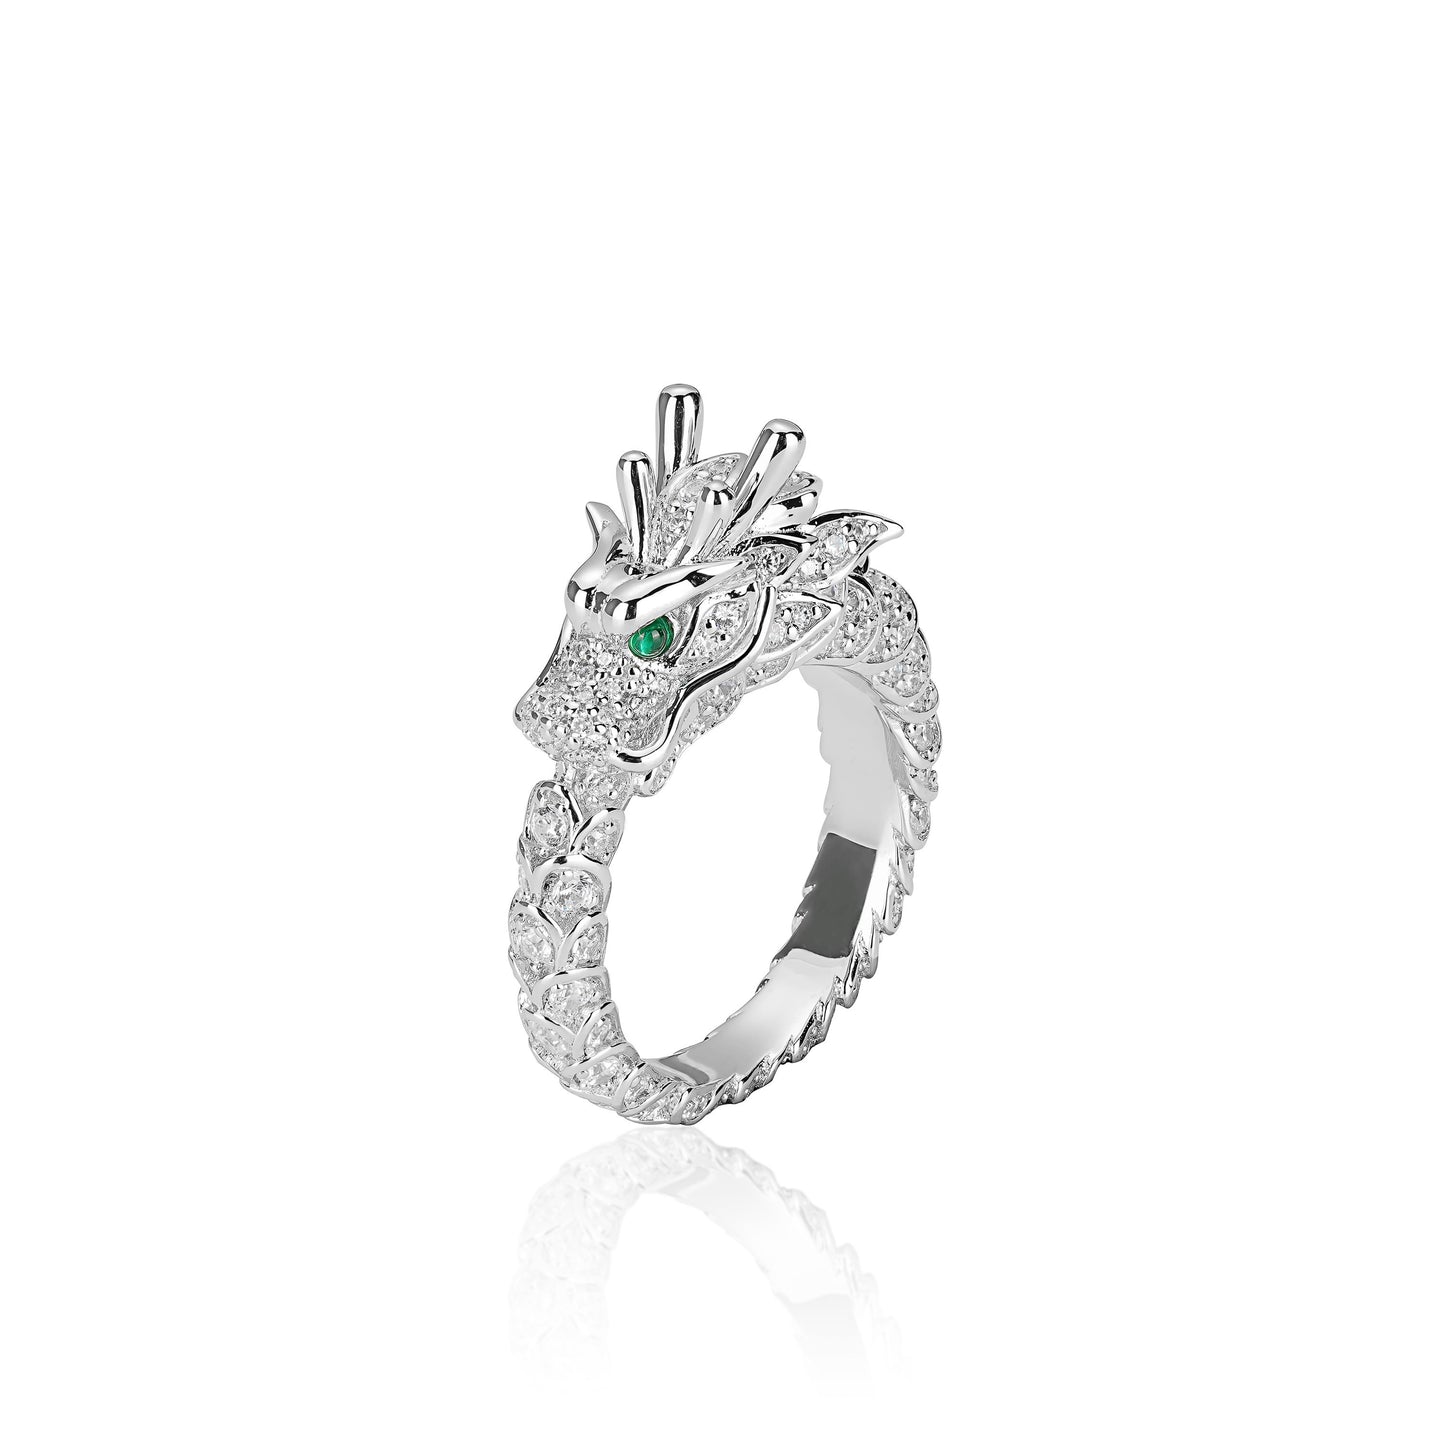 Showstopping: Luxury "One son of dragon" detailed ring